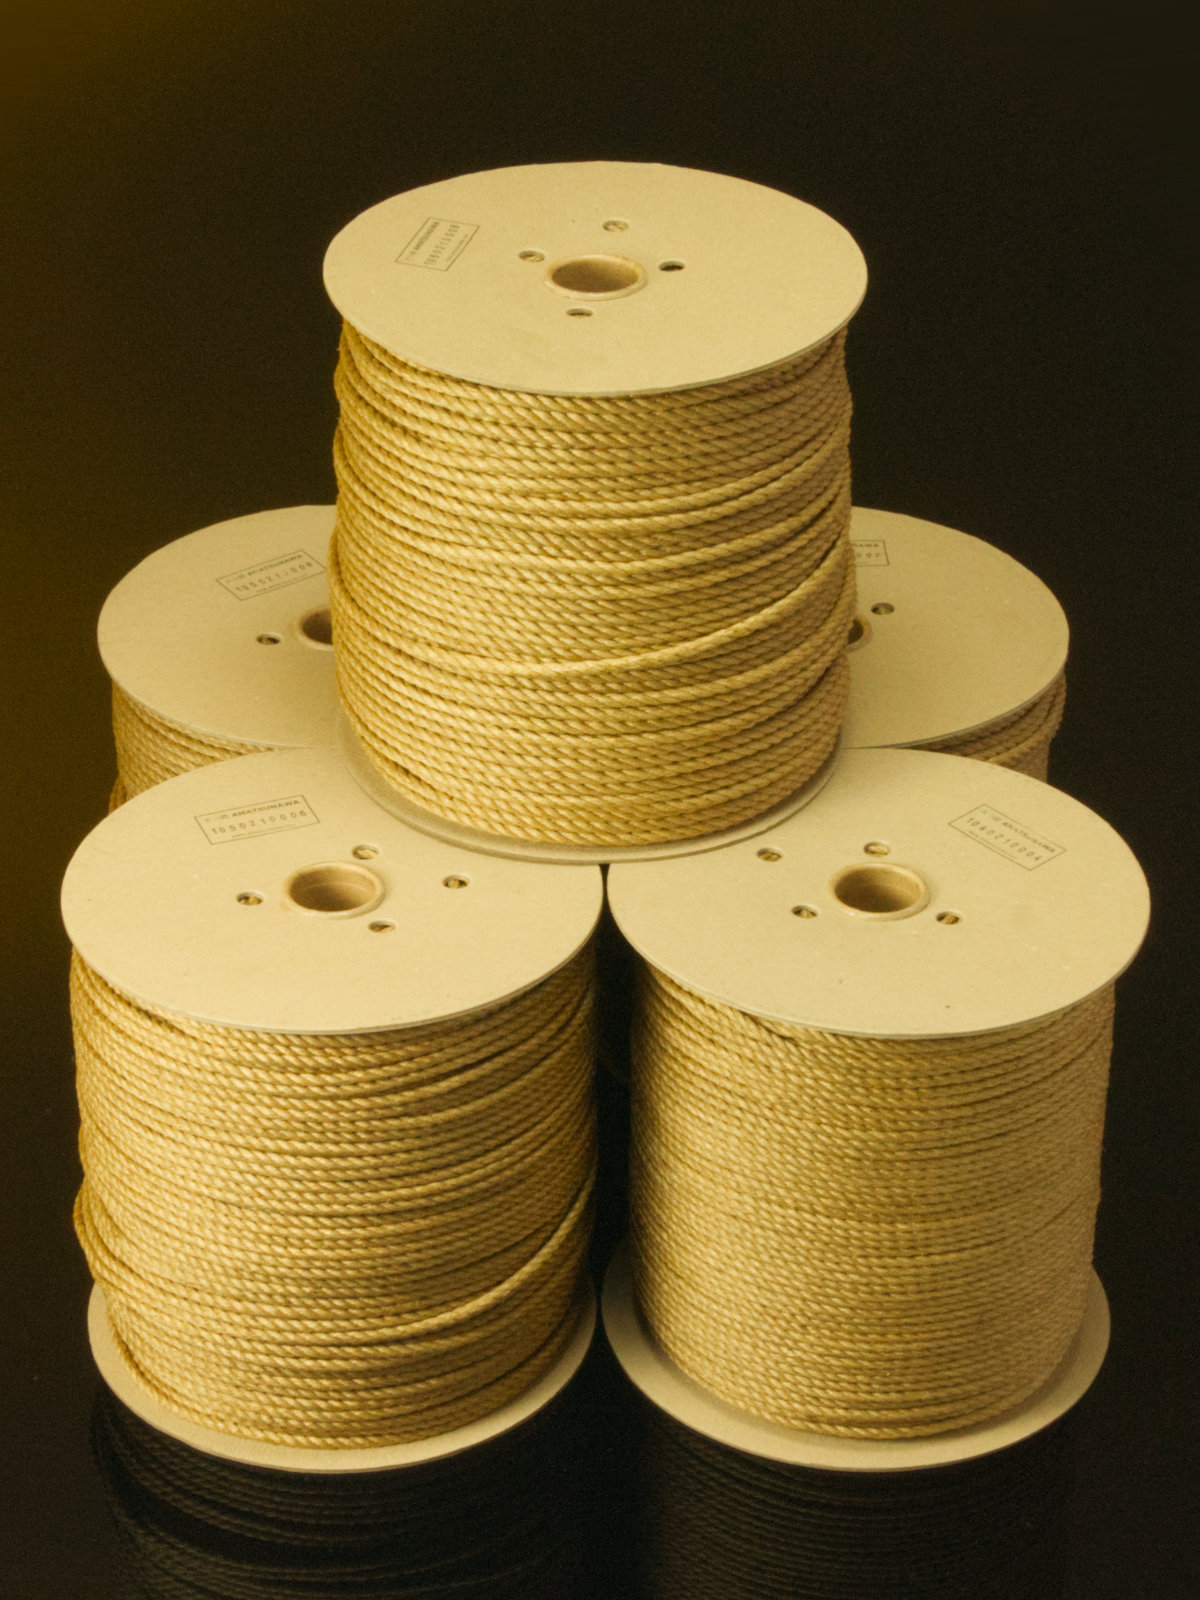 JOUYOKU MAXI-ROLL, ~6kg ready-for-use Japanese-made jute rope, various diameters, JBO-free, new 2023 batch!